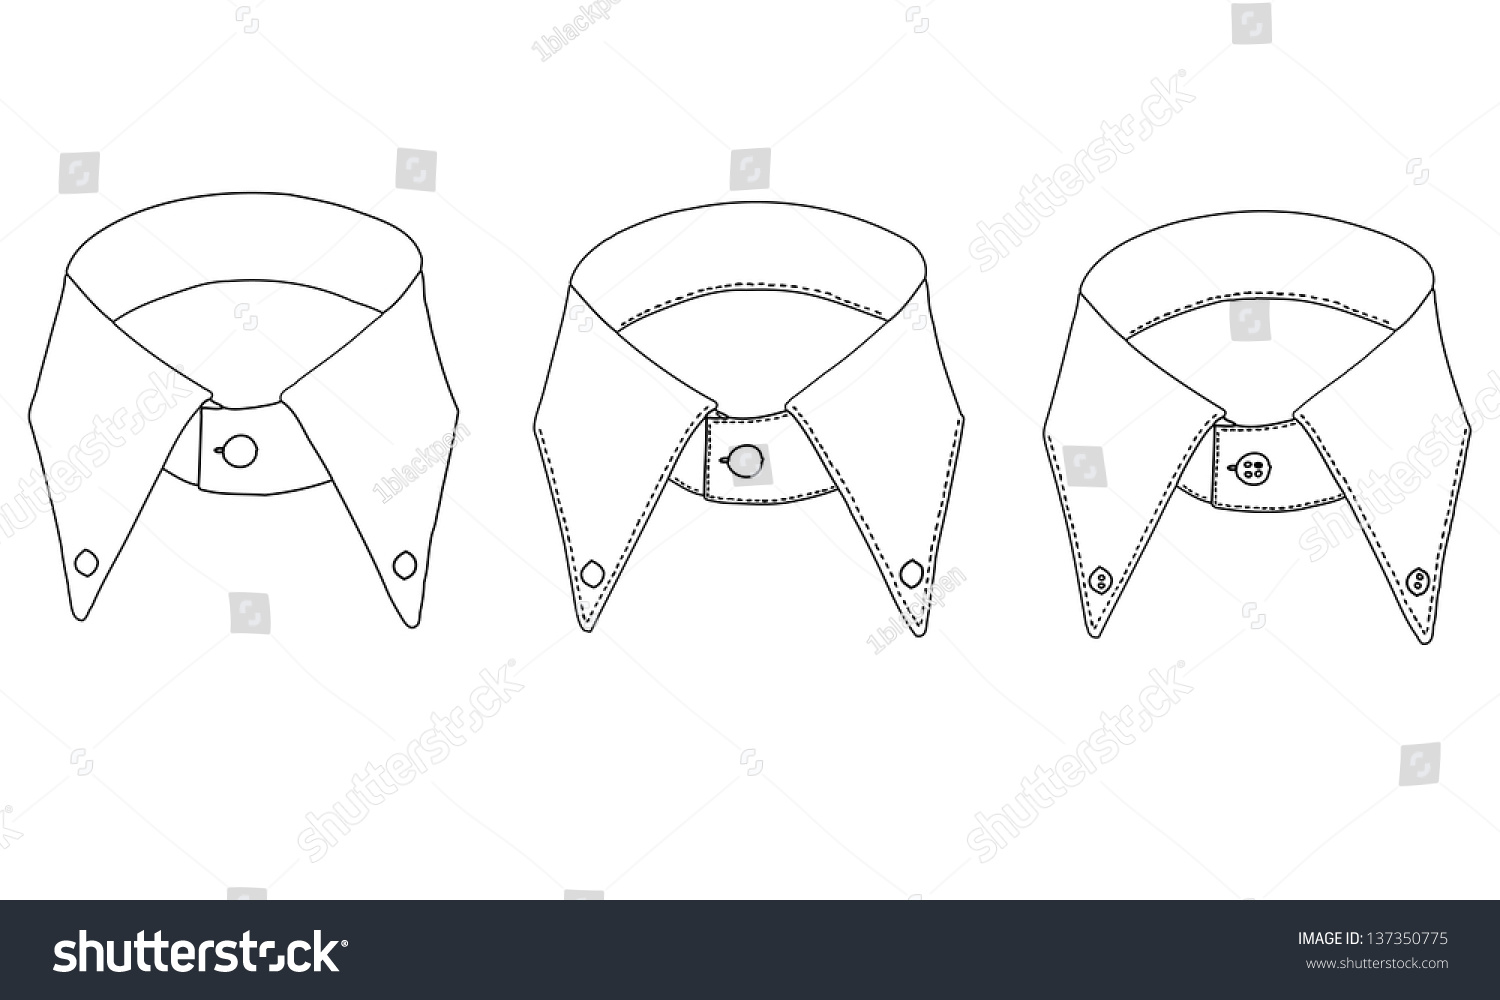 Black And White Isolated Vector Design Of A Man'S Shirt Collar With 3 ...